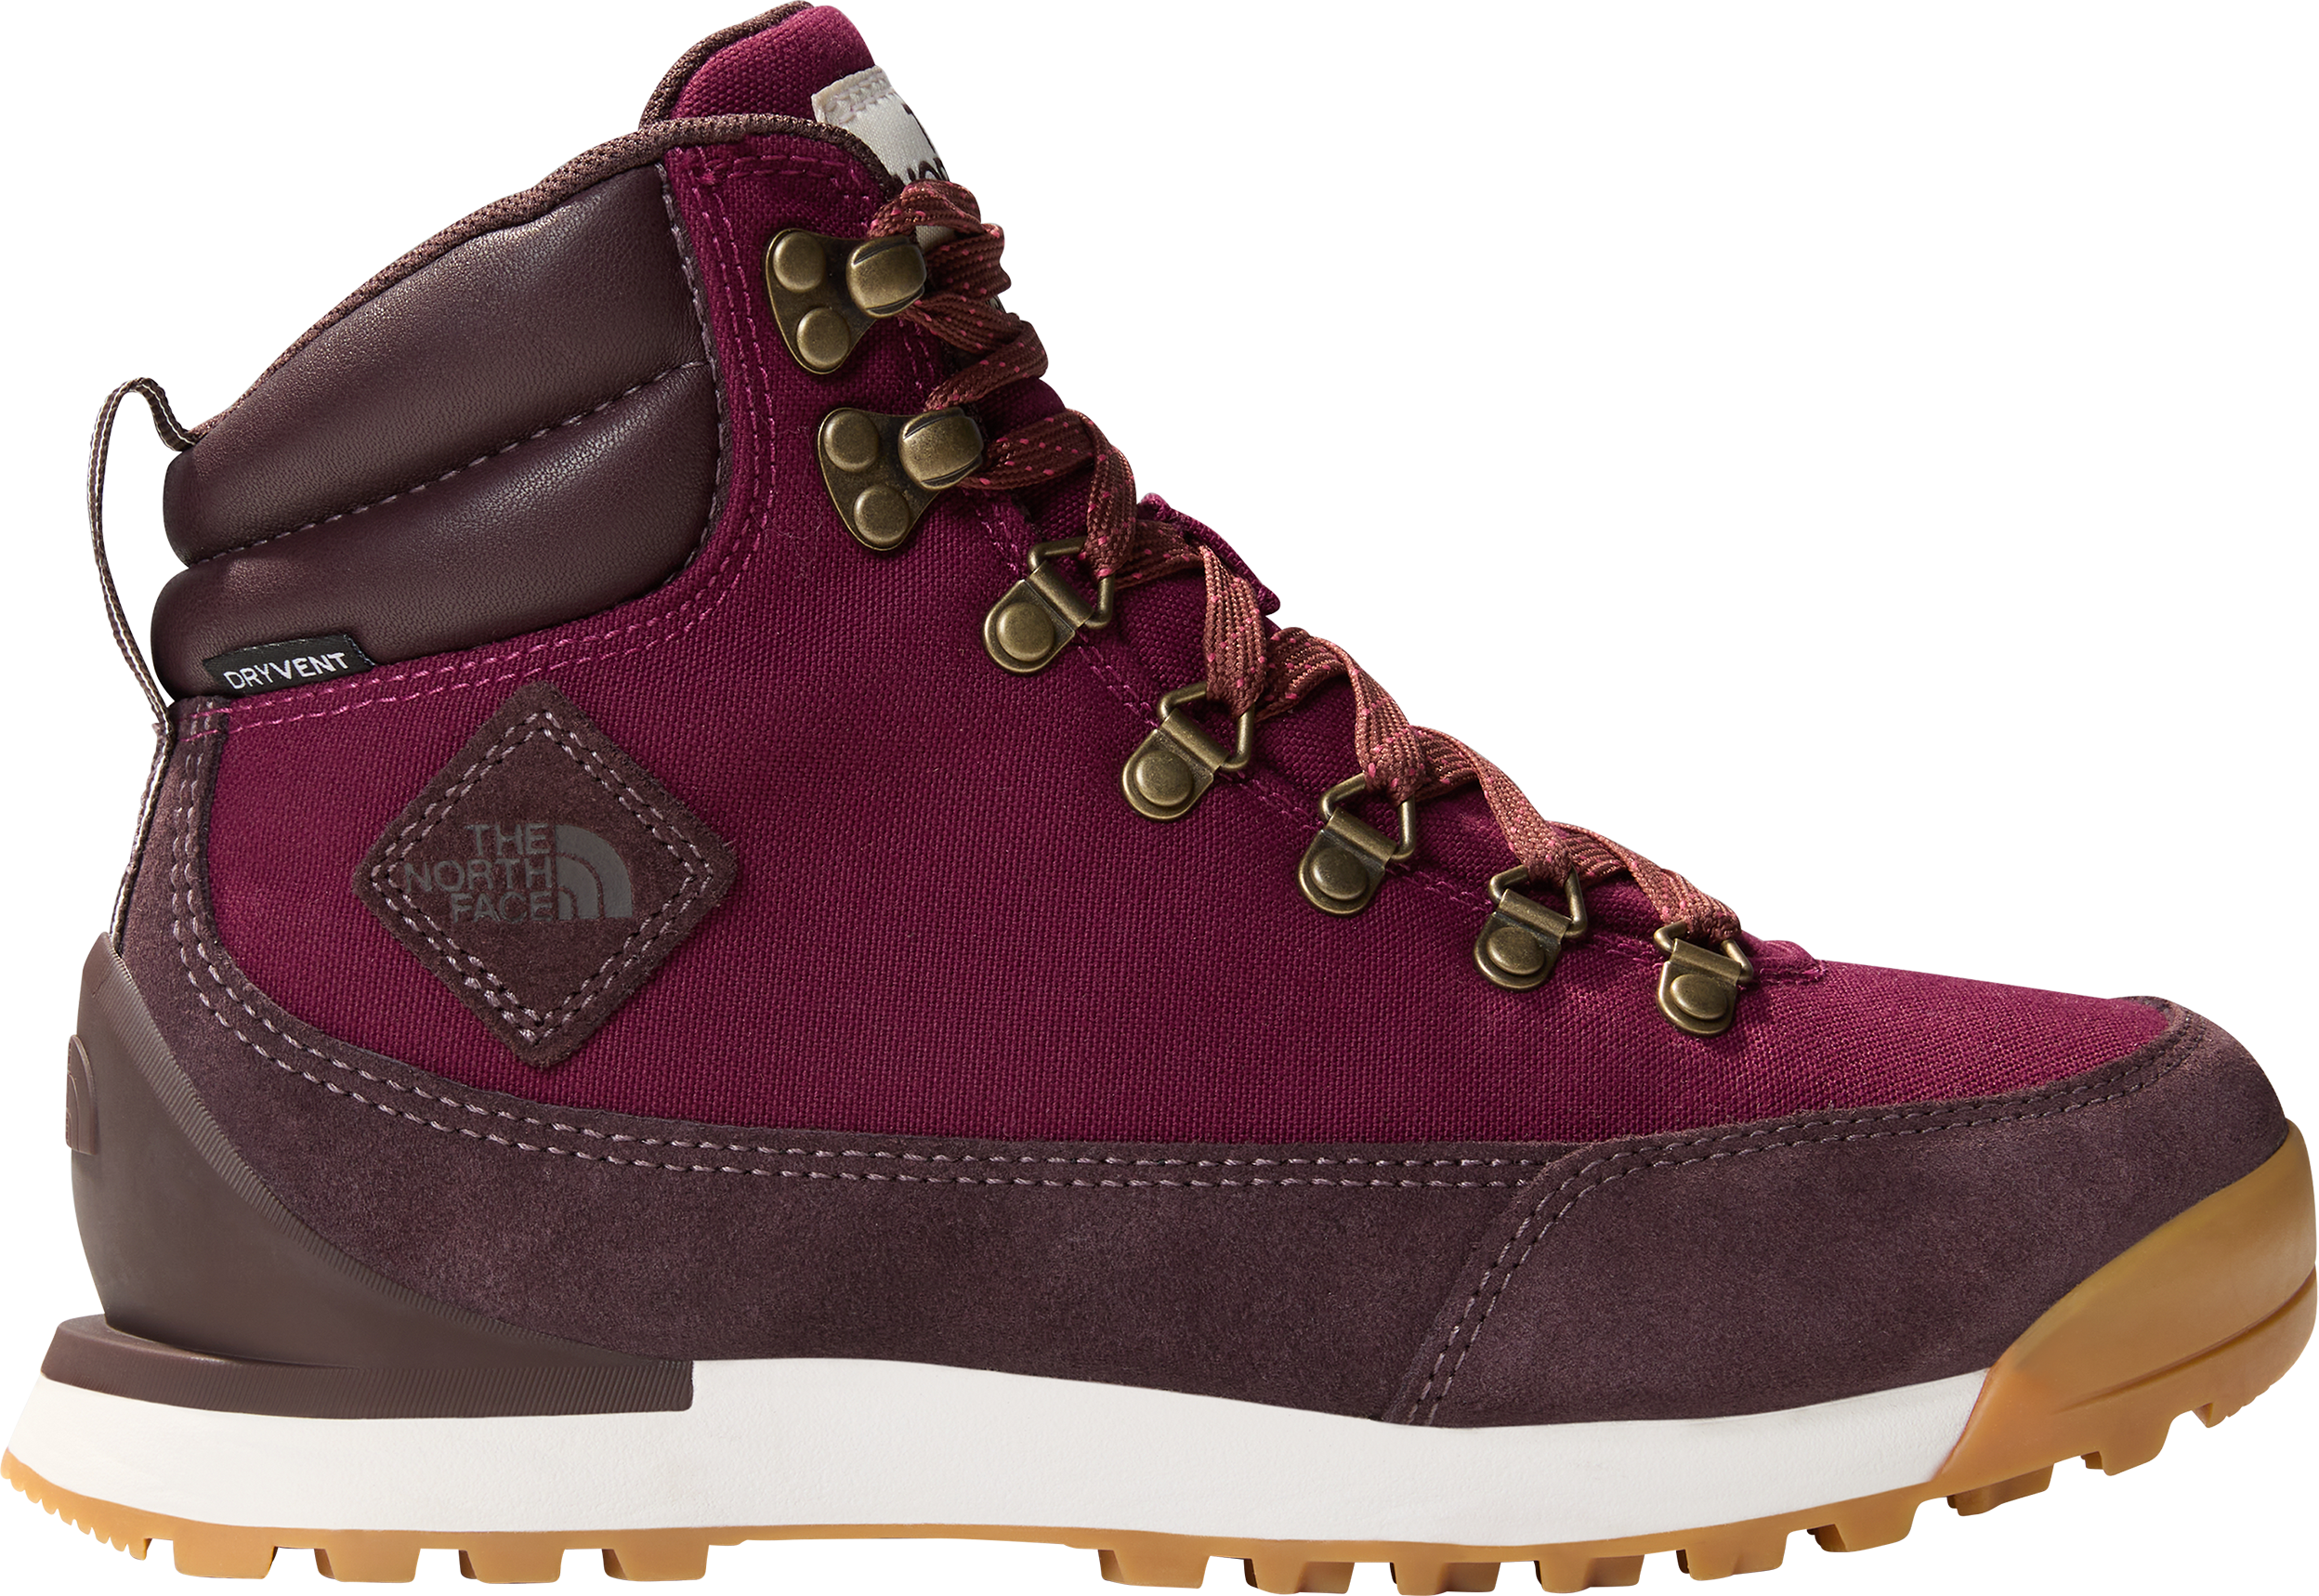 The North Face Women’s Back-to-Berkeley IV Textile Lifestyle Boots BOYSENBERRY/COAL BROWN